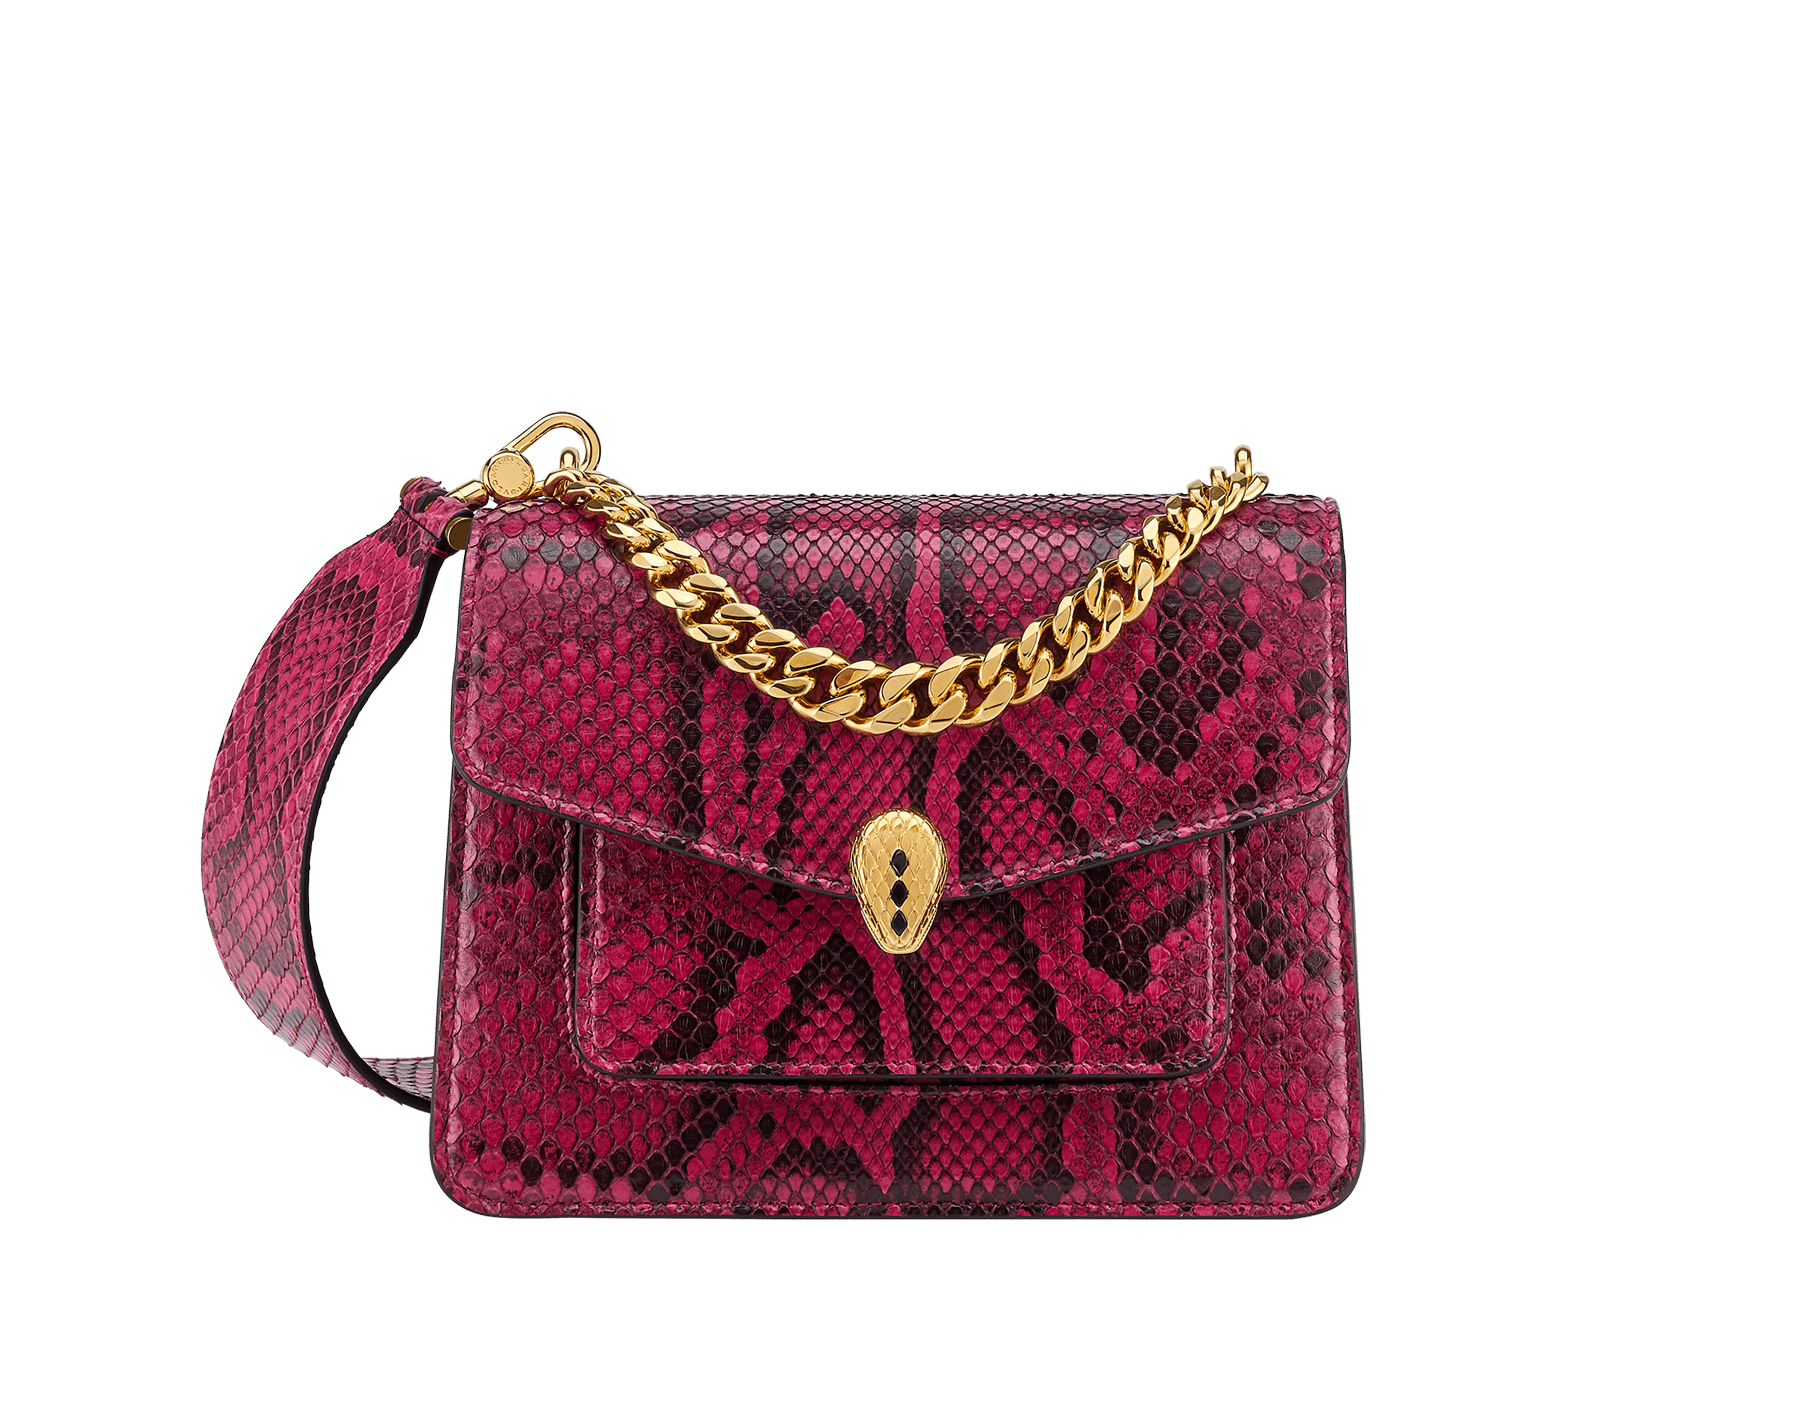 Serpenti Forever Maxi Chain small crossbody bag in soft, shiny anemone spinel pinkish red python skin with black nappa leather lining. Captivating magnetic snakehead closure in gold-plated brass embellished with black onyx scales and red enamel eyes. 1134-SSP image 1